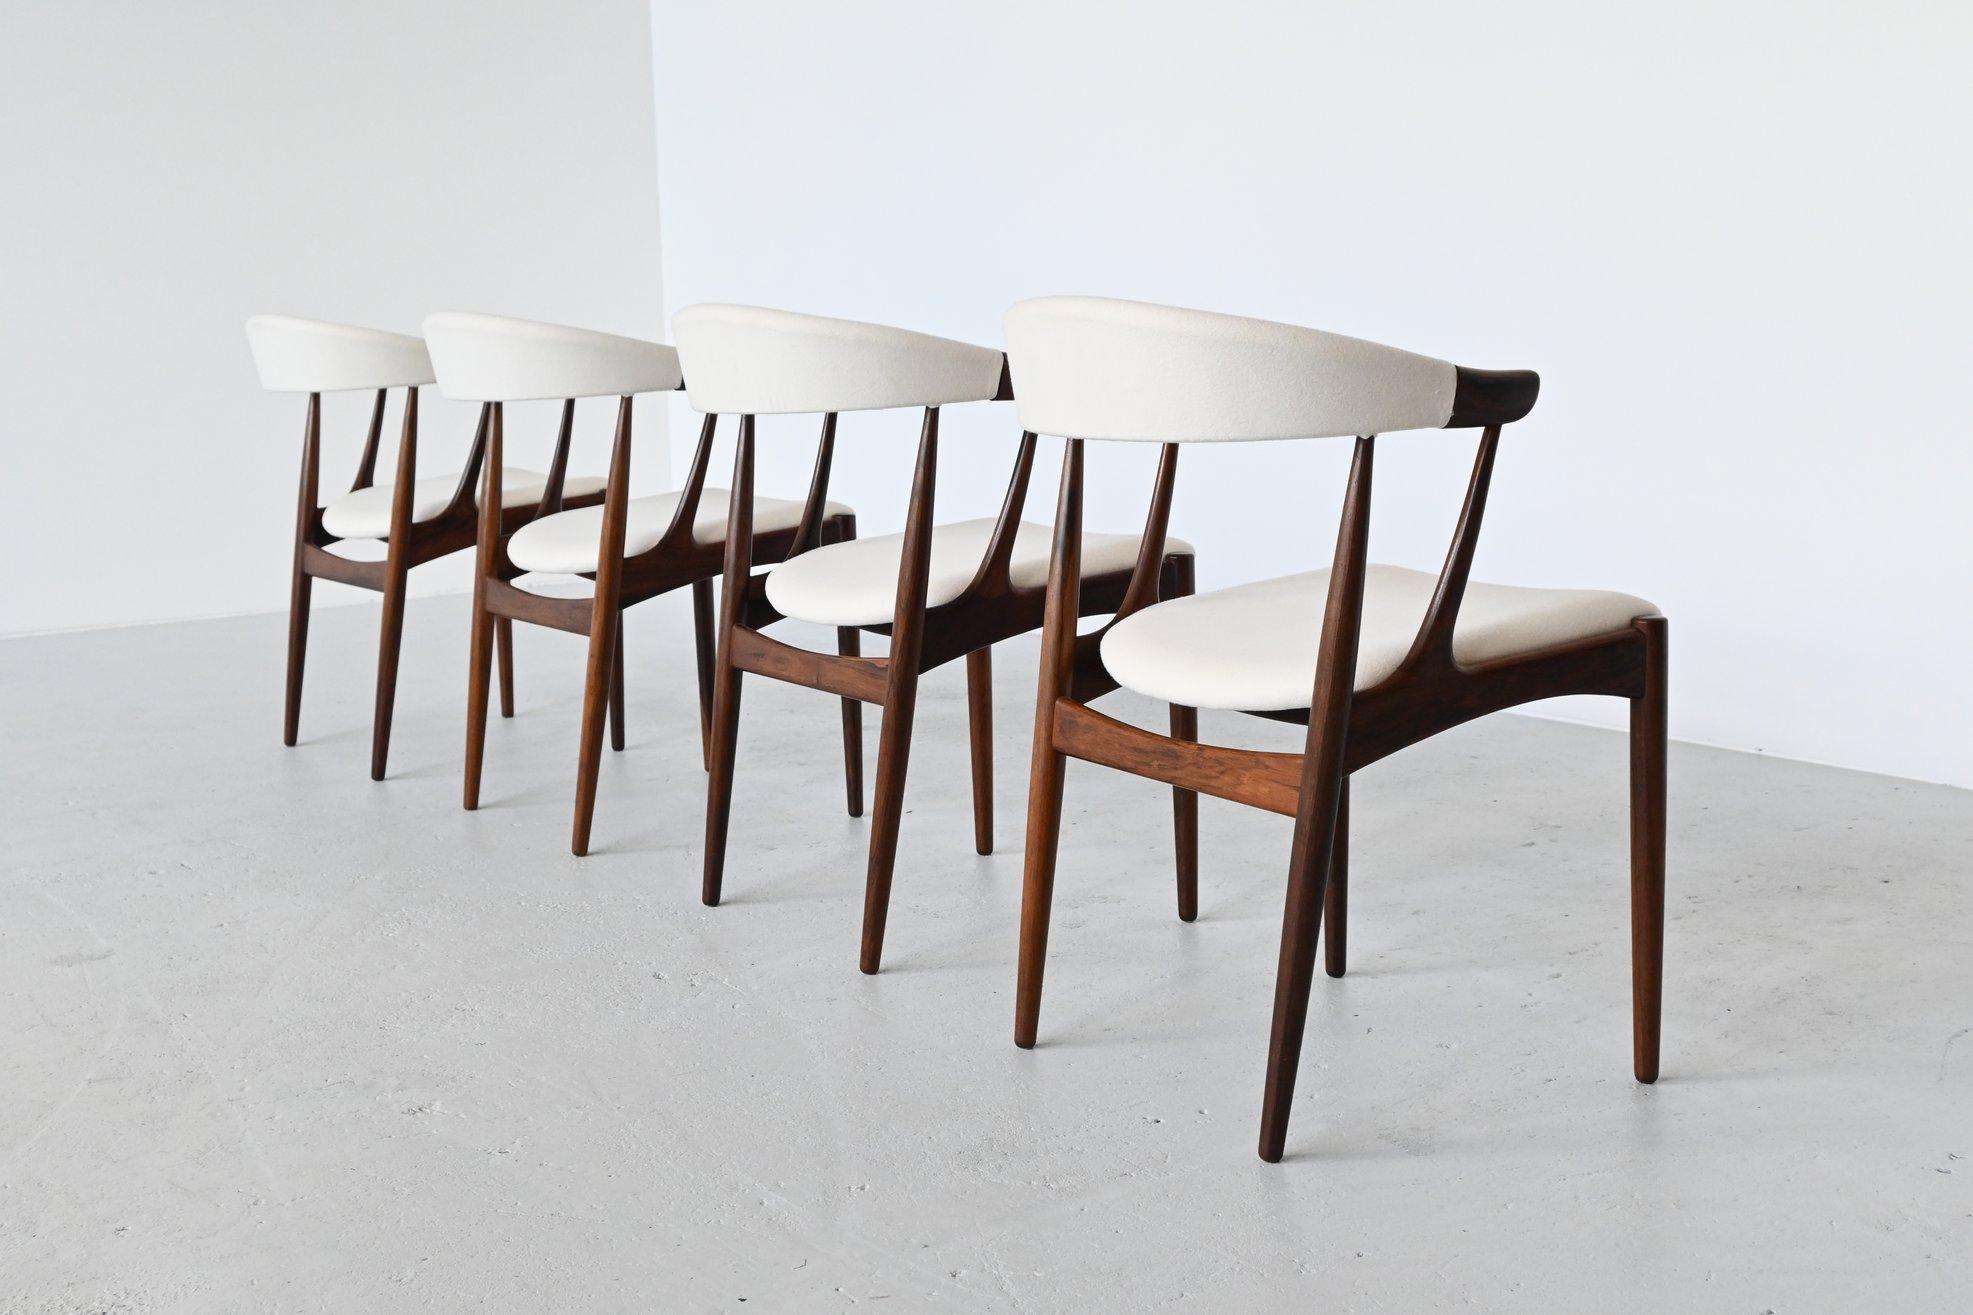 Stunning set of dining chairs model BA113 designed by Johannes Andersen and manufactured by Brdr. Andersens Møbelfabrik A/S, Denmark 1969. The chairs features a solid rosewood frame and they are newly upholstered with white Divina upholstery from